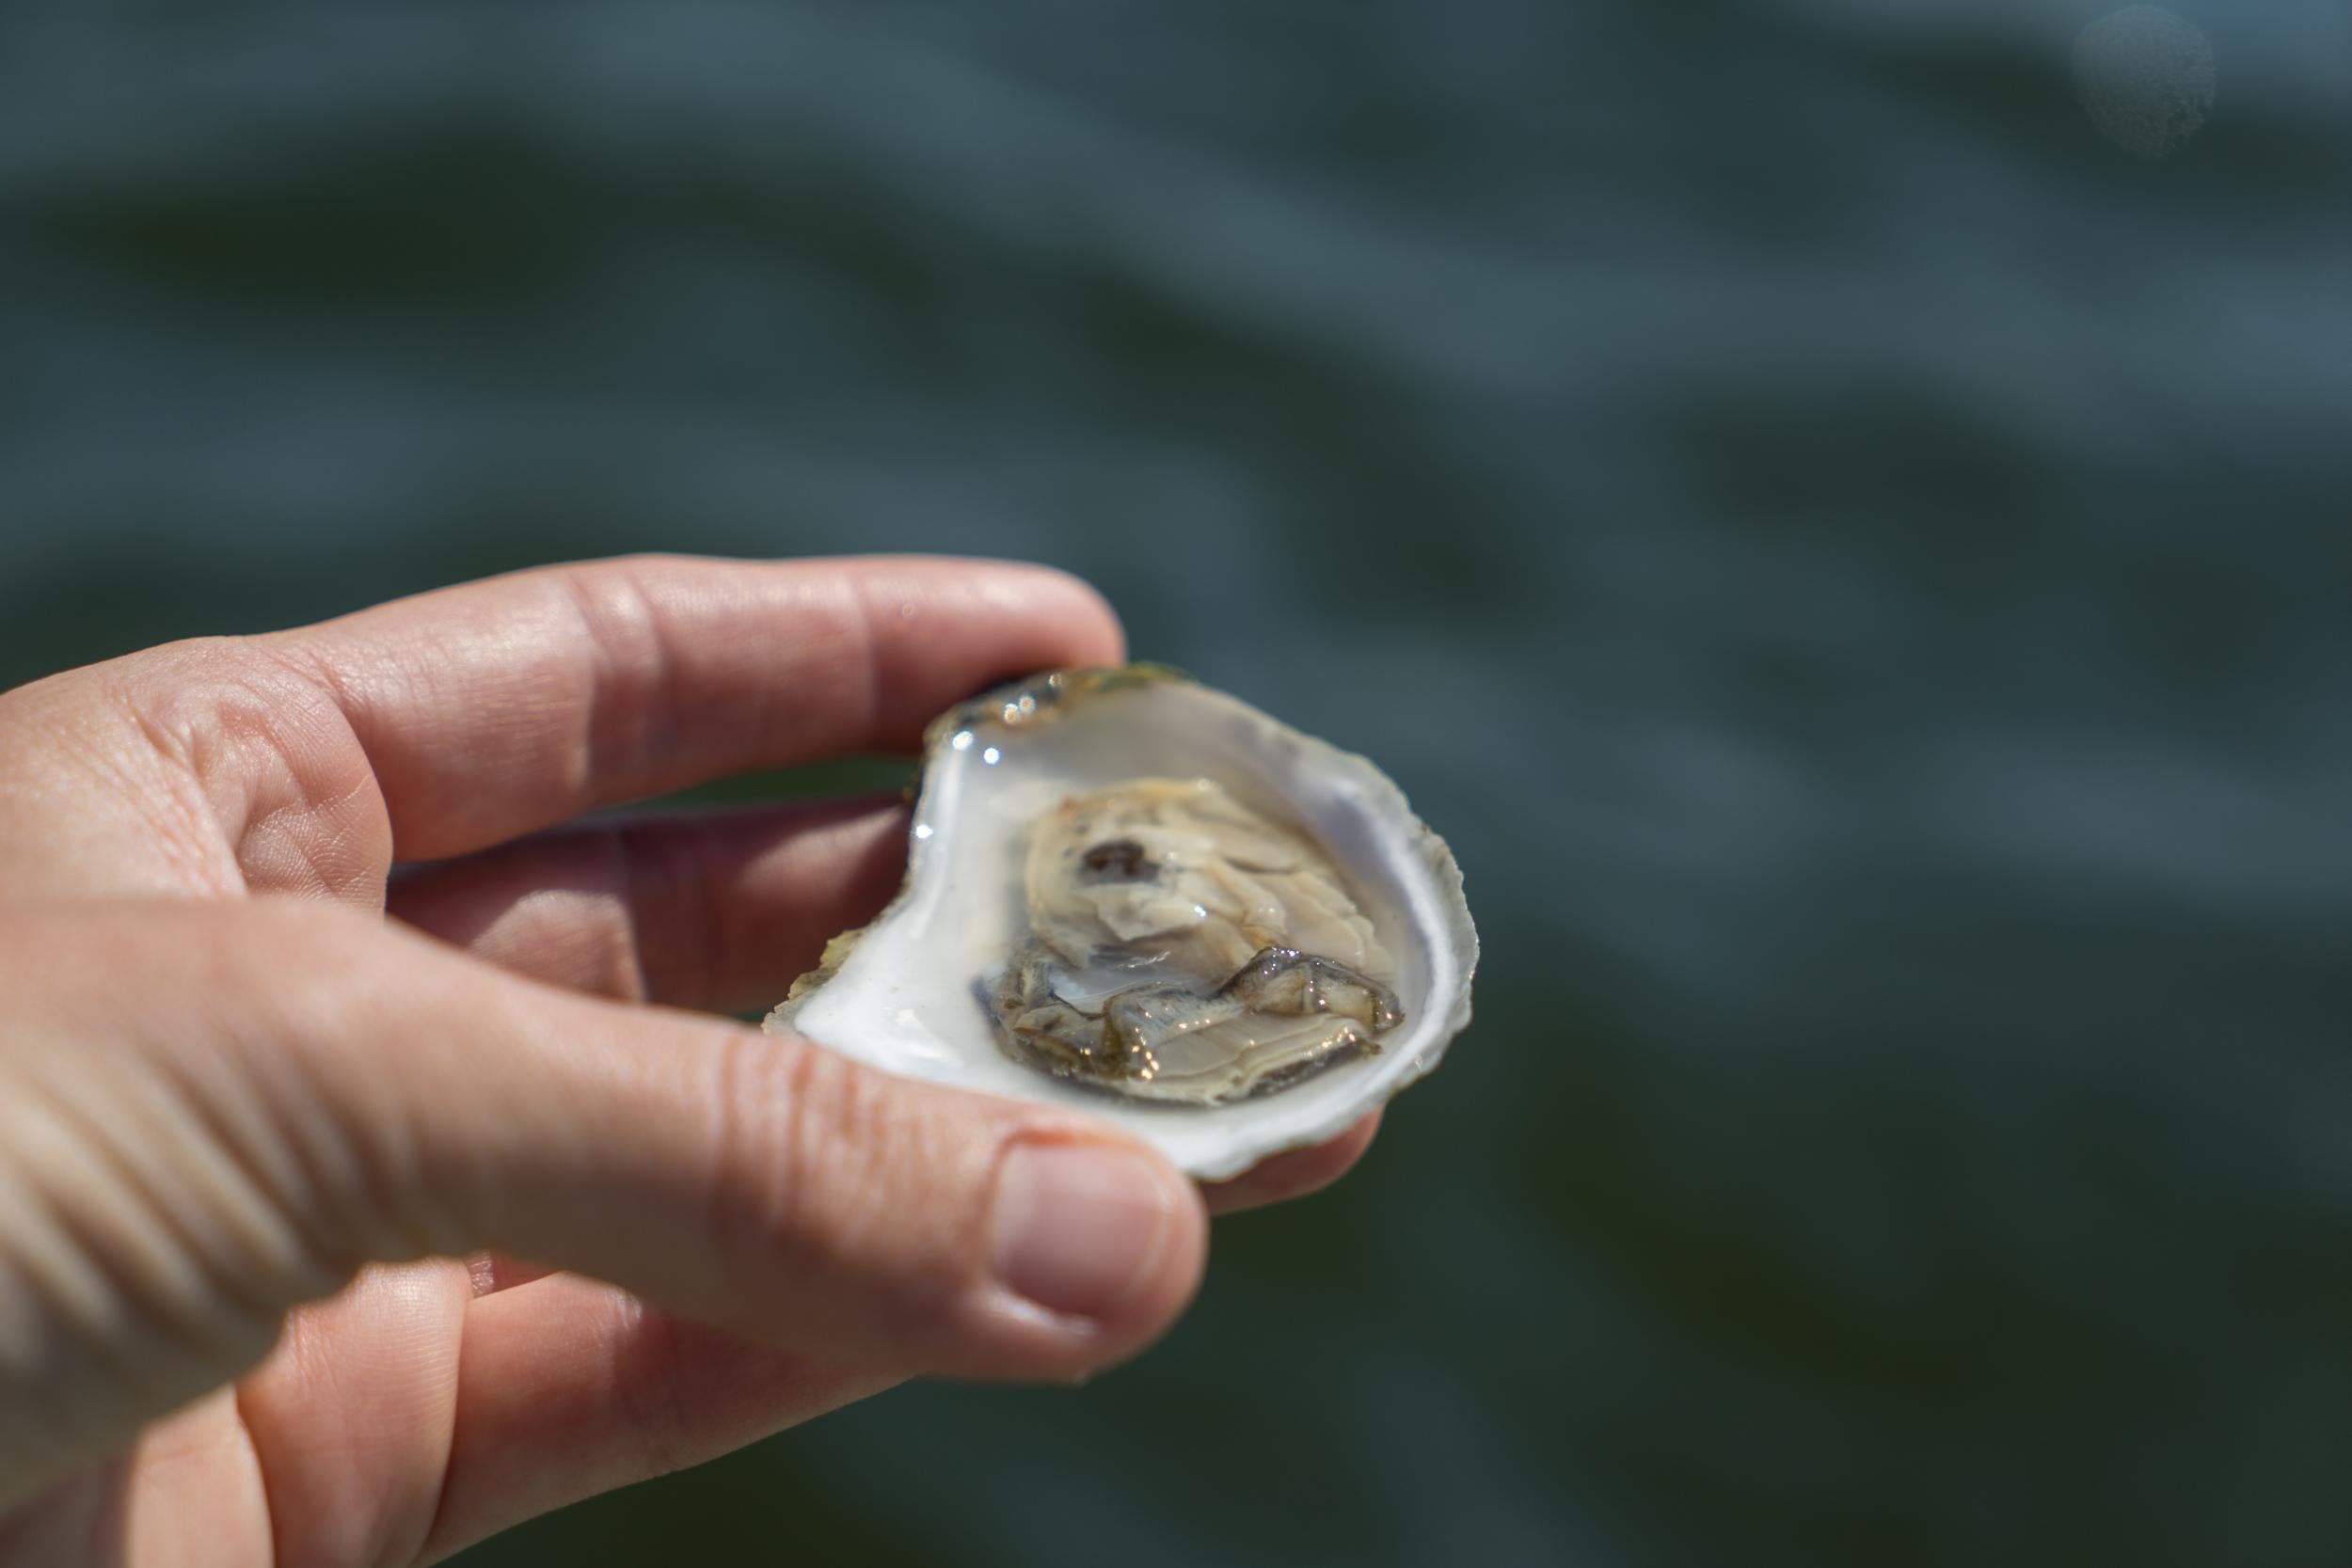 Eventide Oyster Co. offers 19 varieties